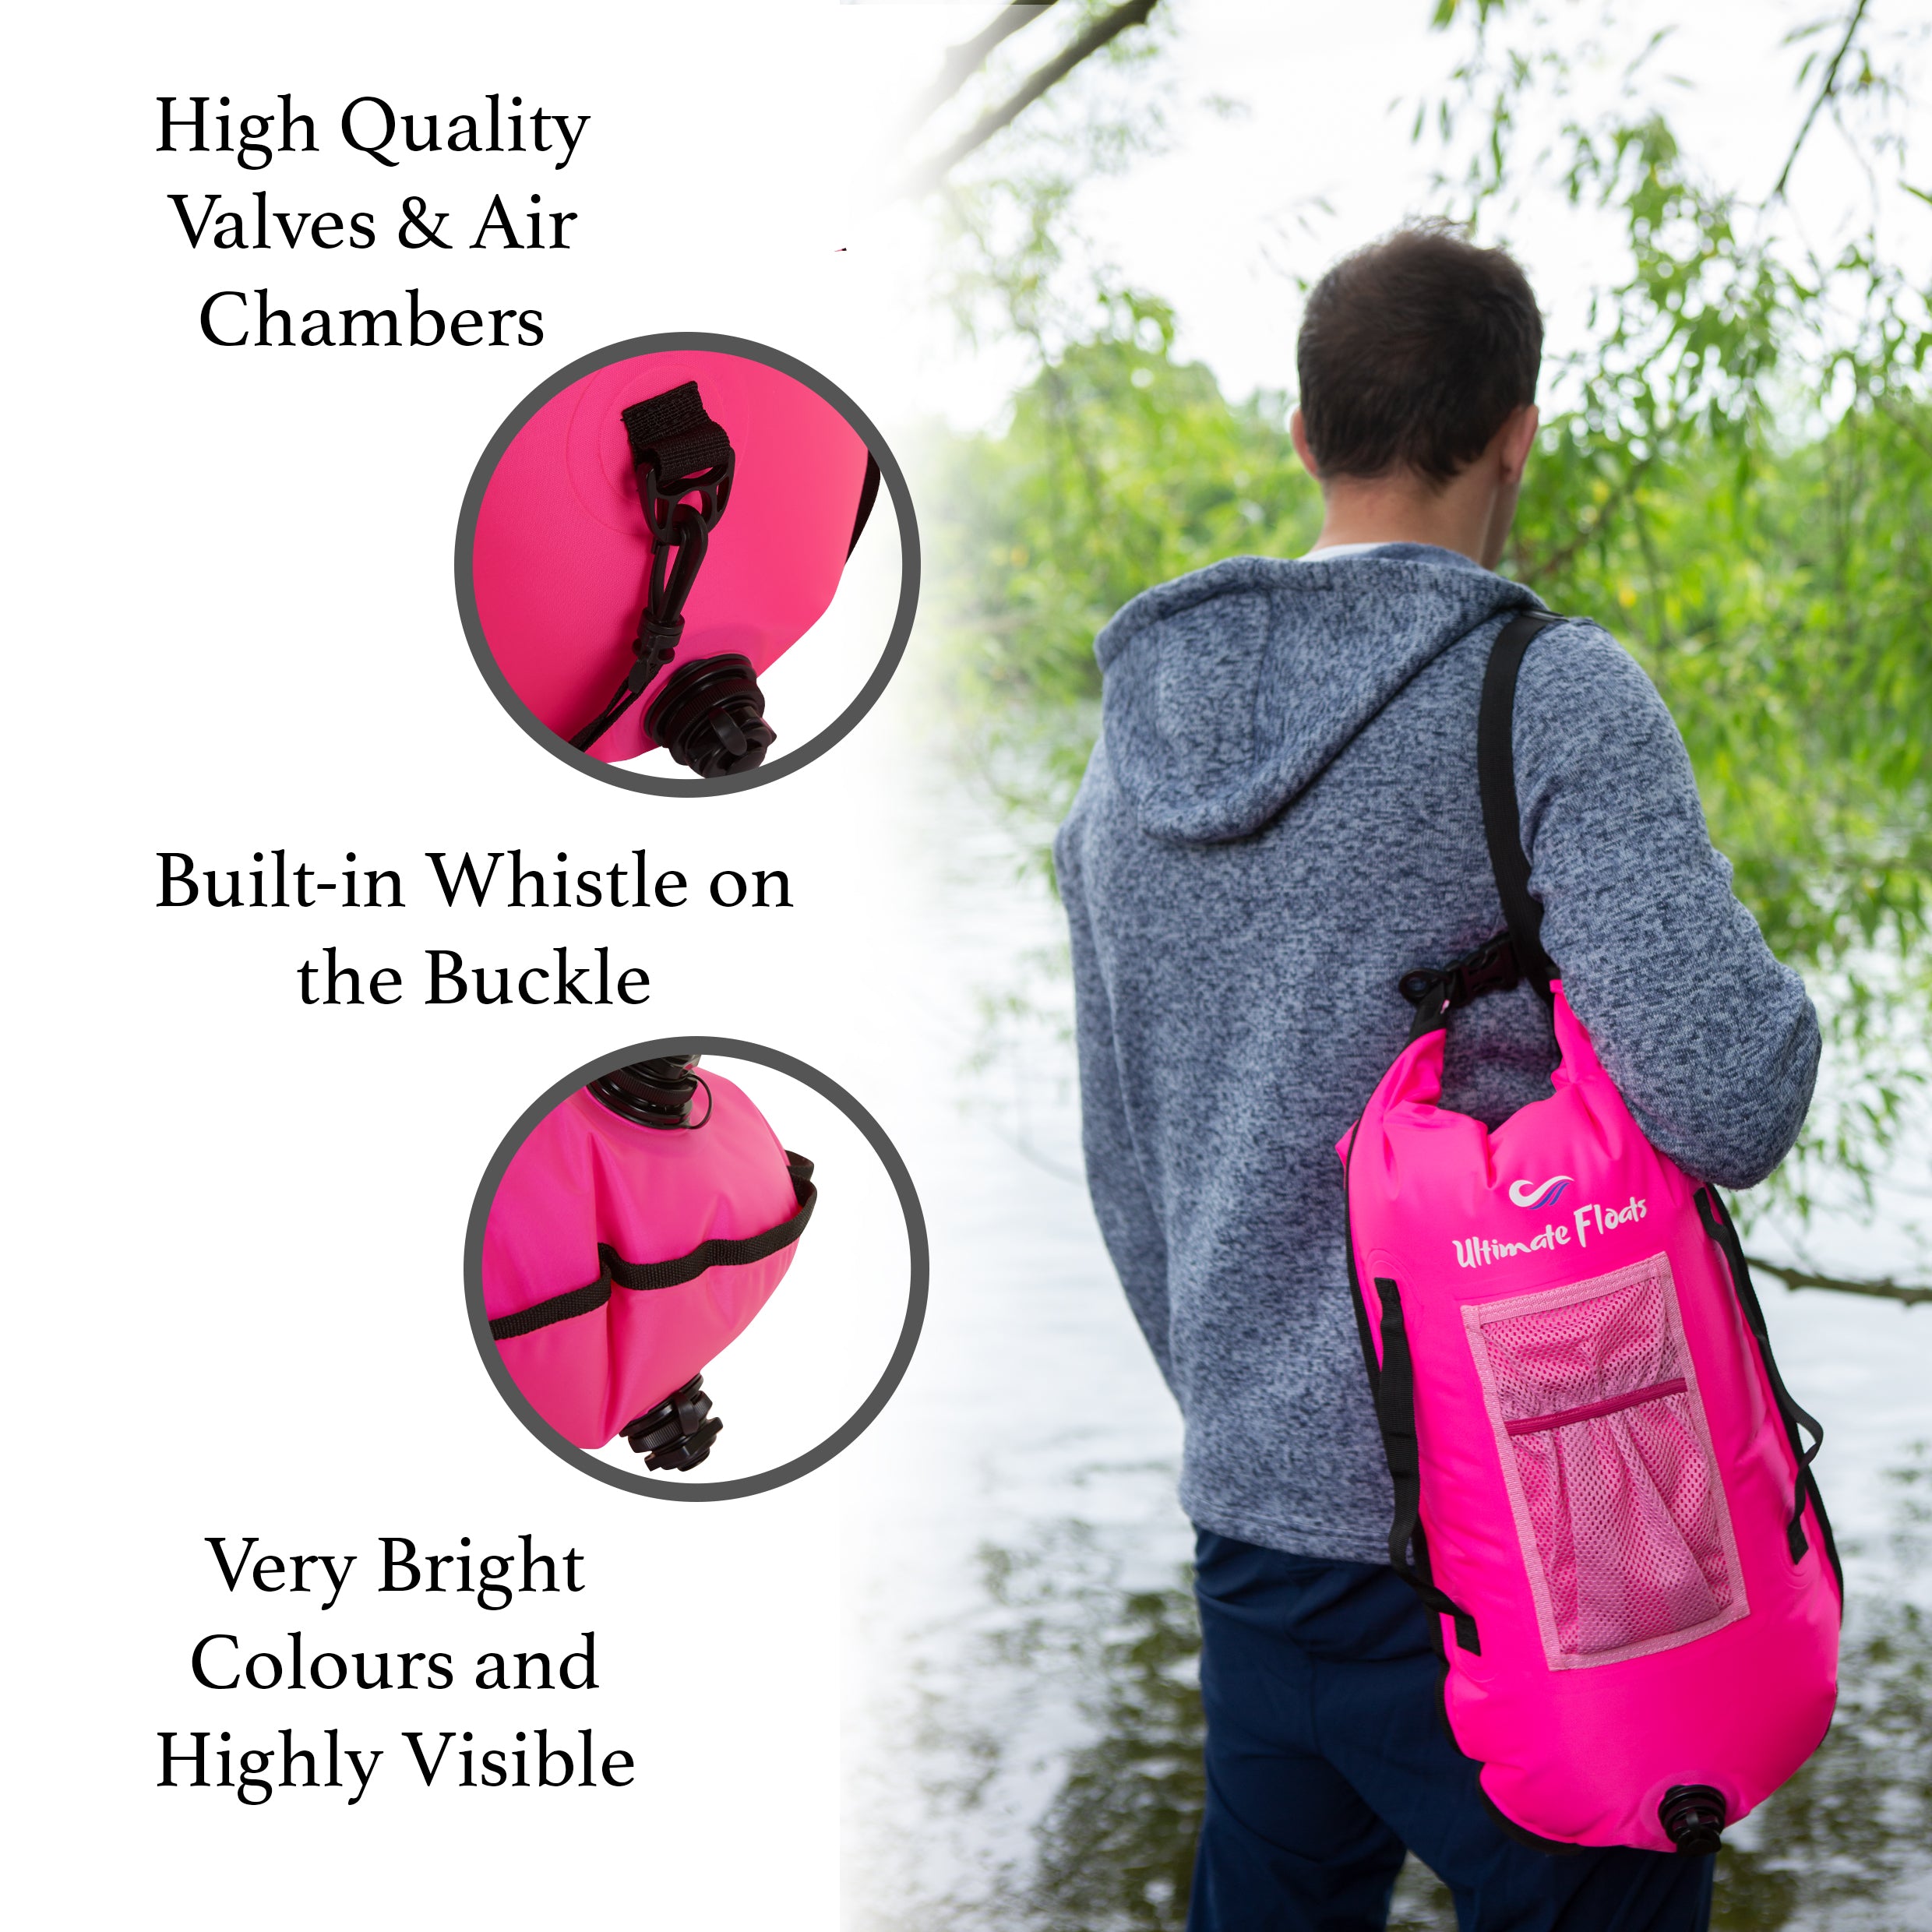 Ultimate Floats Dry Bag - Pink